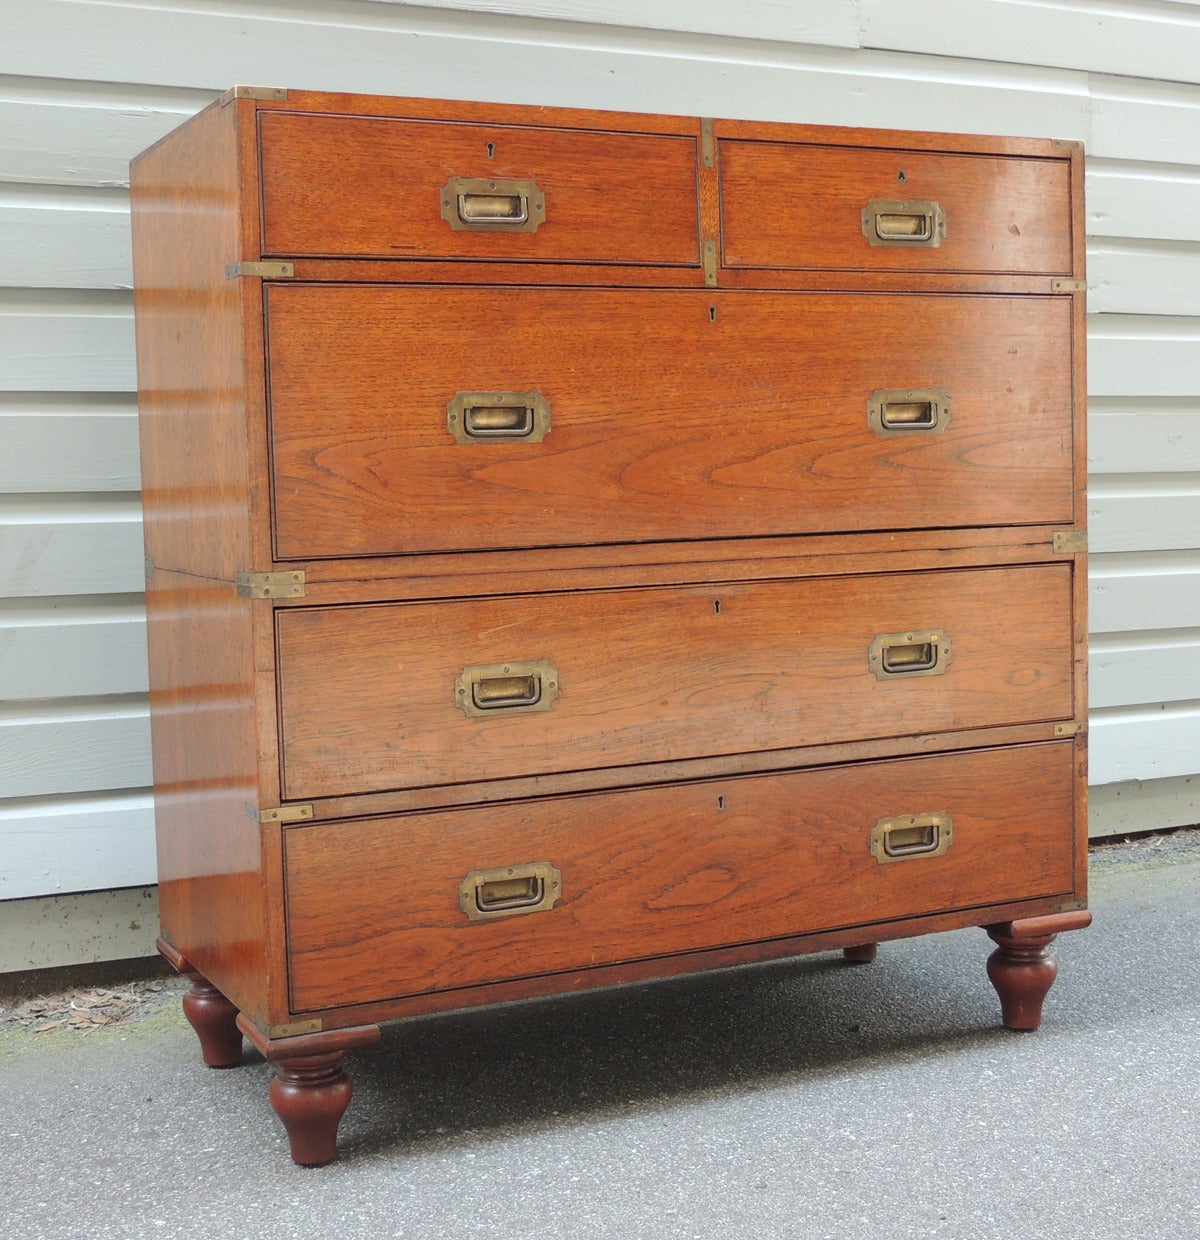 This English Campaign chest is made of teakwood and features five locking drawers. The detachable top half of the piece features two drawers above a large lower drawer. The lower half features two drawers that sit above four simple turned vase feet.